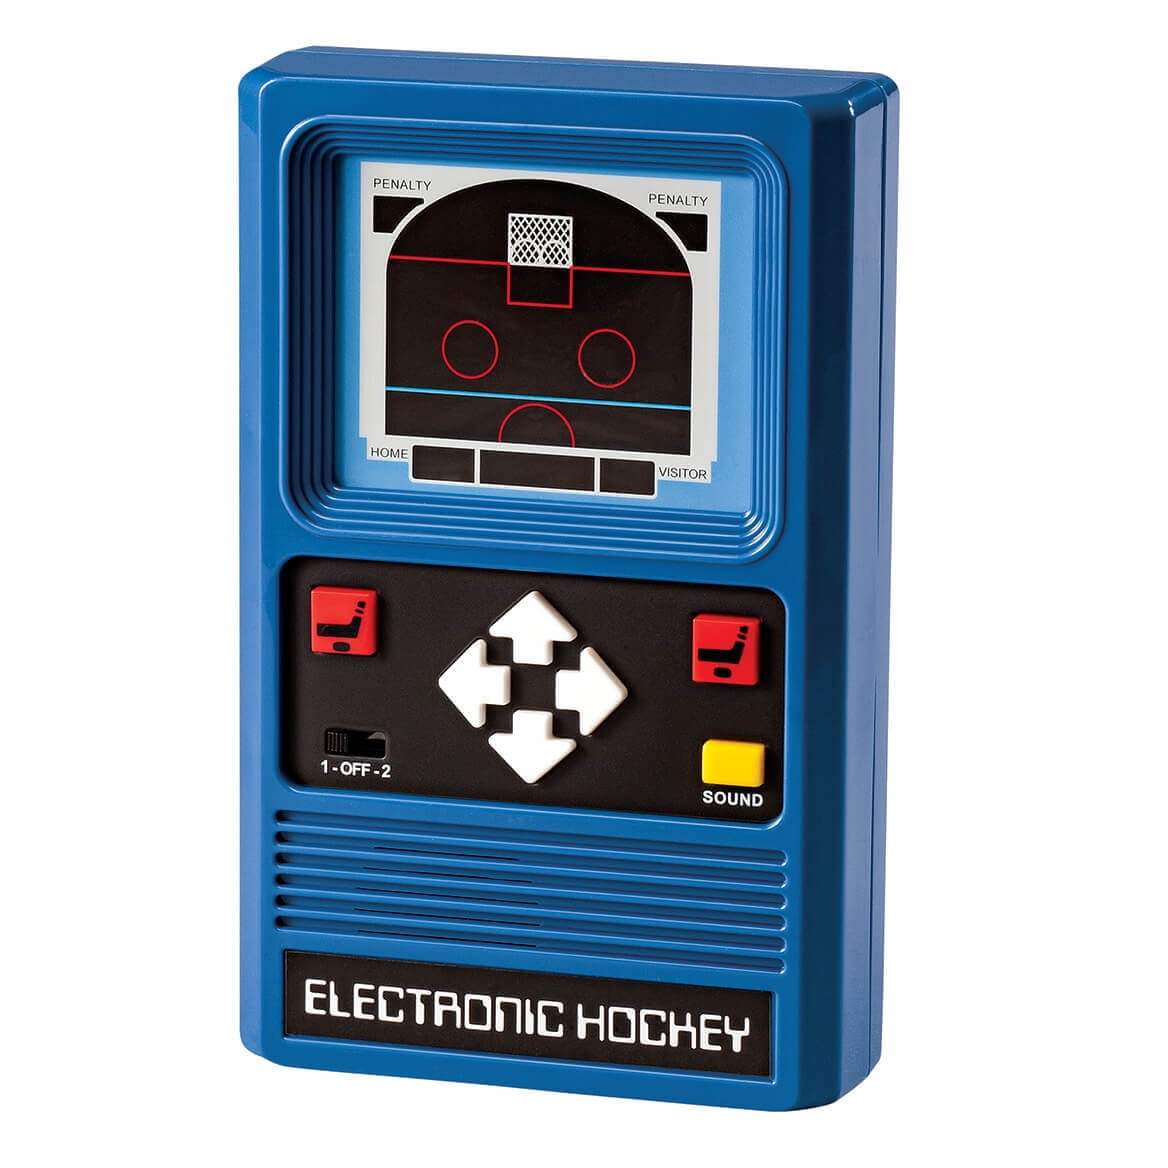 Mattel Classic Electronic Baseball World's Coolest Mini Game 2016 for sale online 